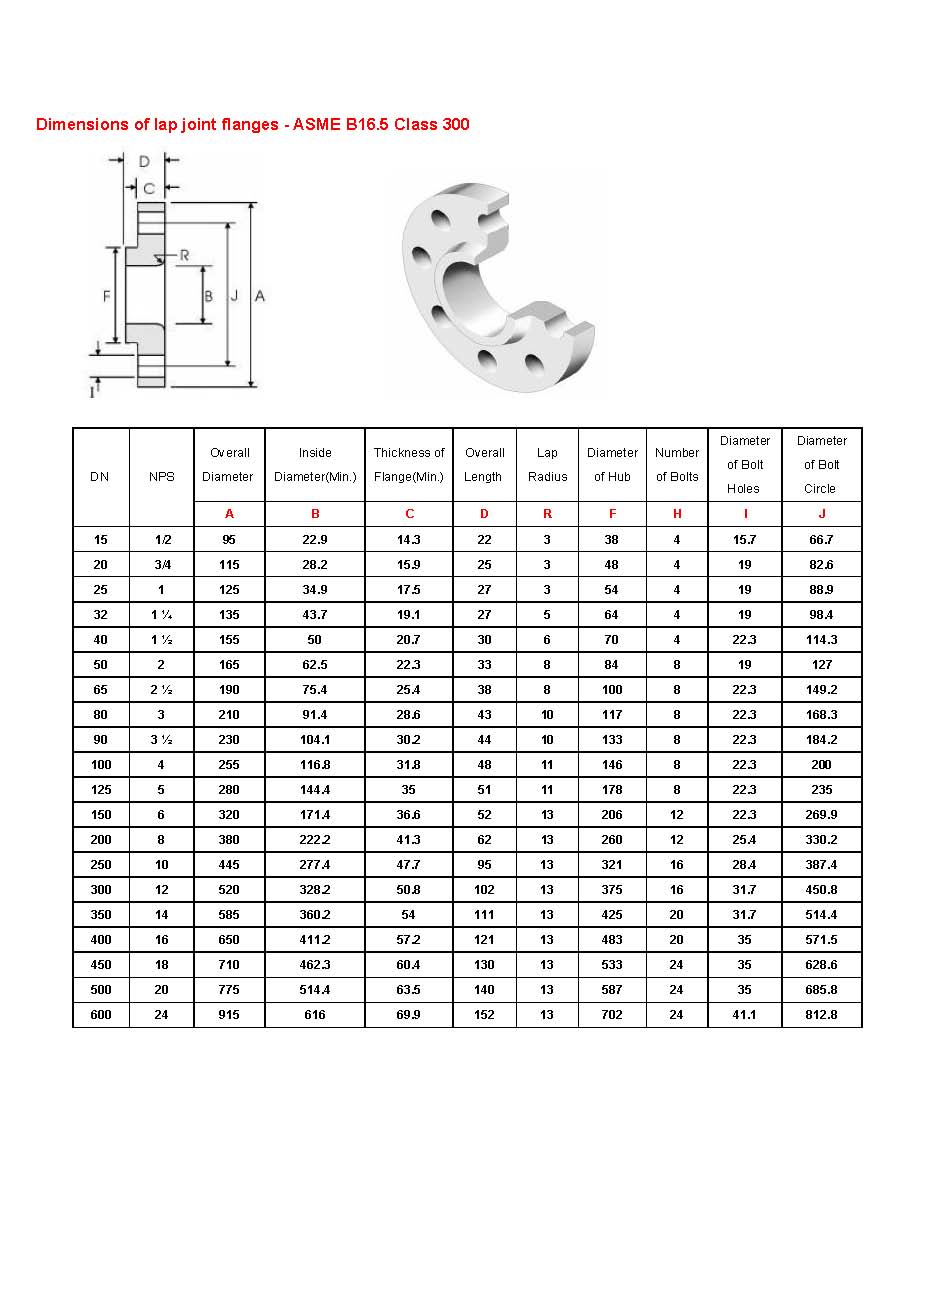 Dimensions of lap joint flanges - ASME B16.5_class300